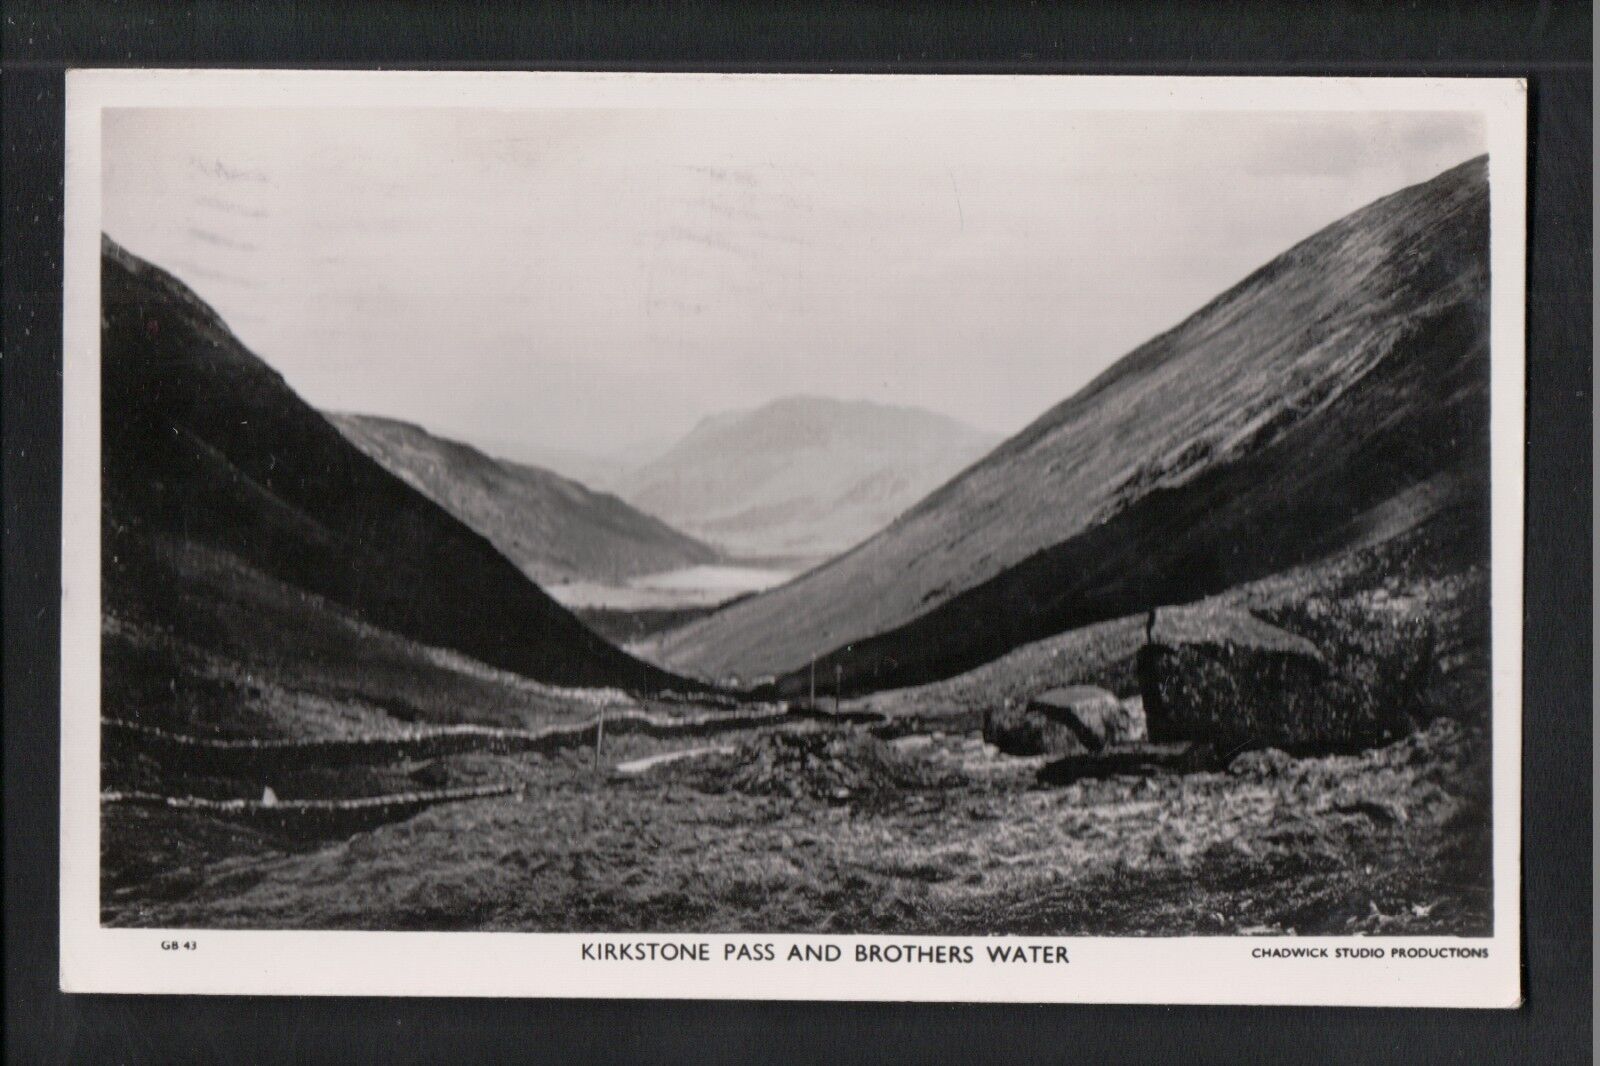 House Clearance - L@@K  Kirkstone Pass and Brothers Water Cumbria 1950 RP Service ~ NICE IMAGE